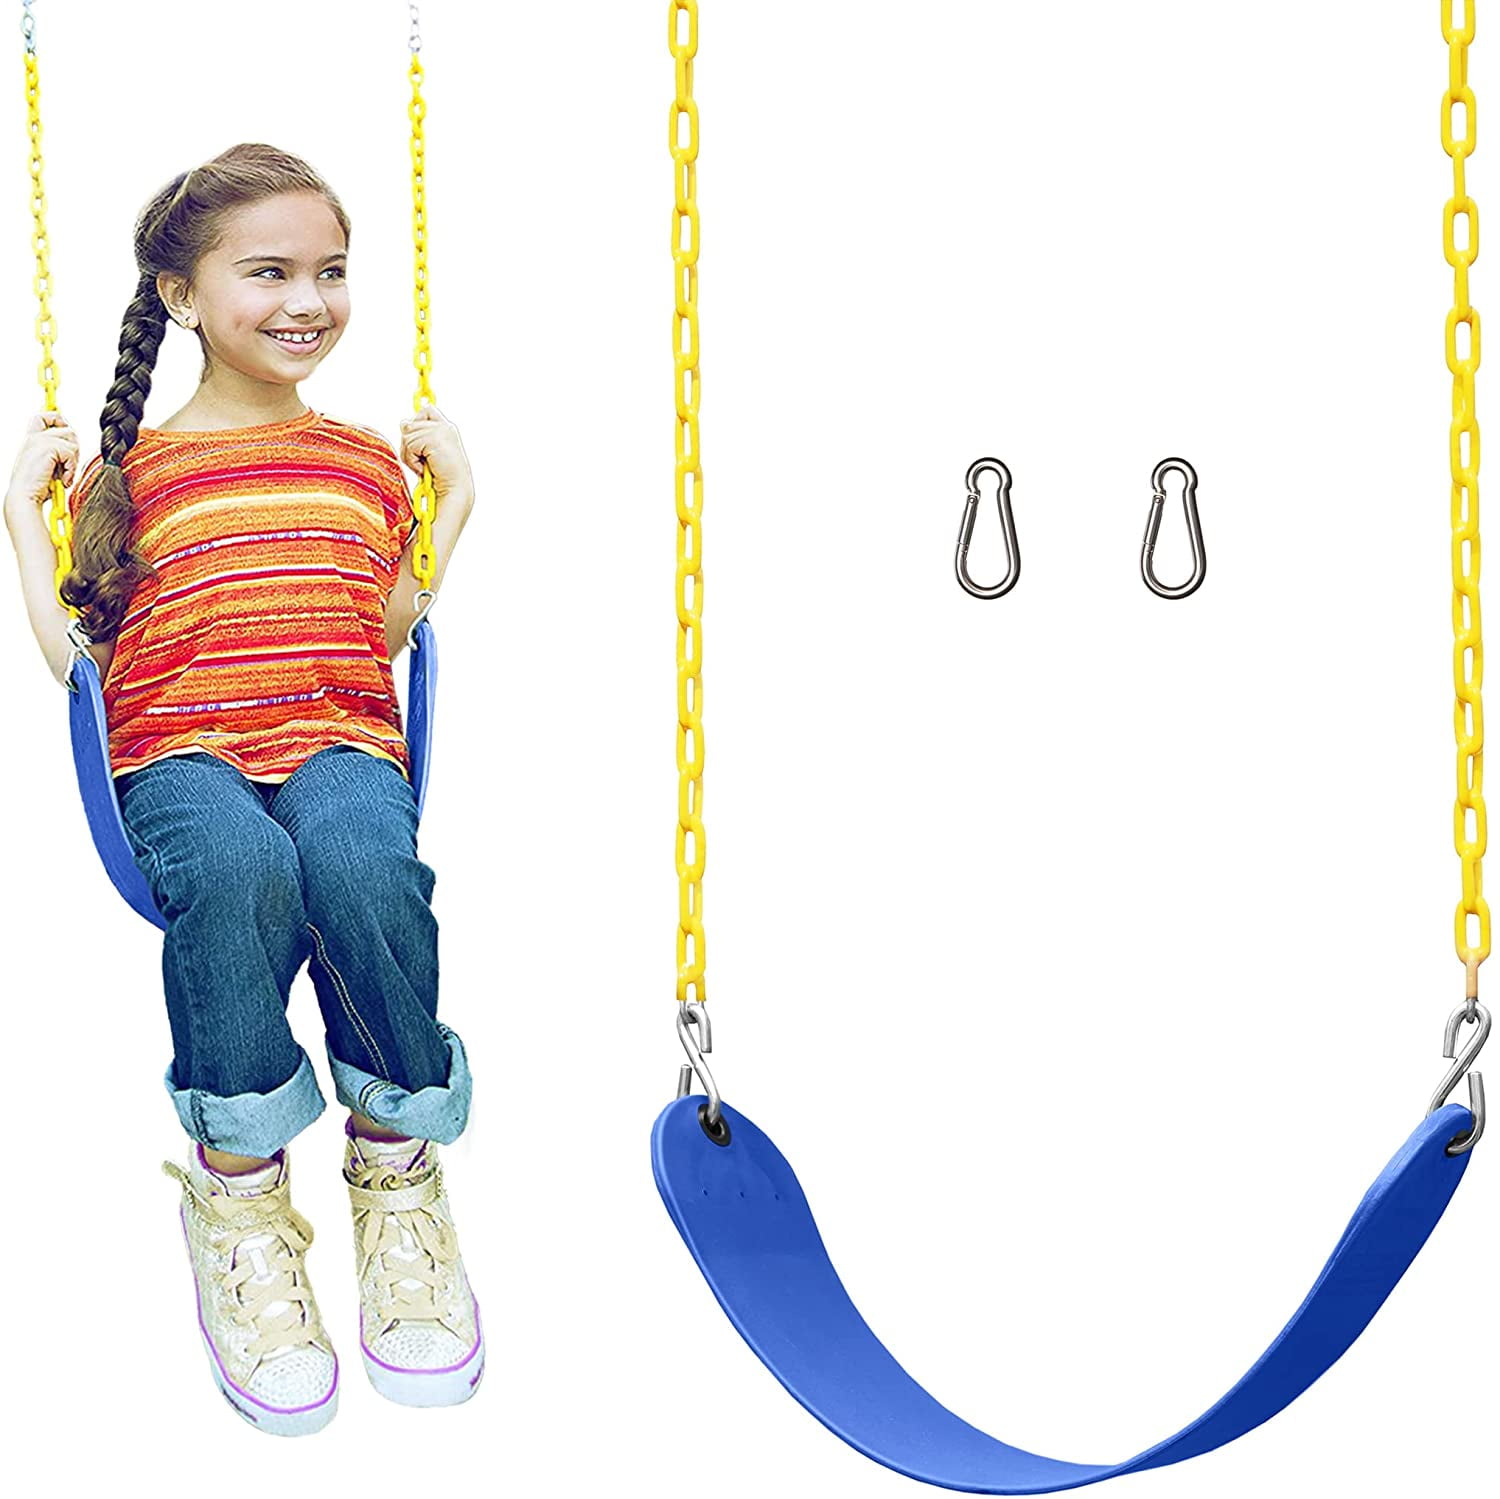 Playground Quality Commercial Heavy duty rubber swing seat HEAVY ROPES chain 